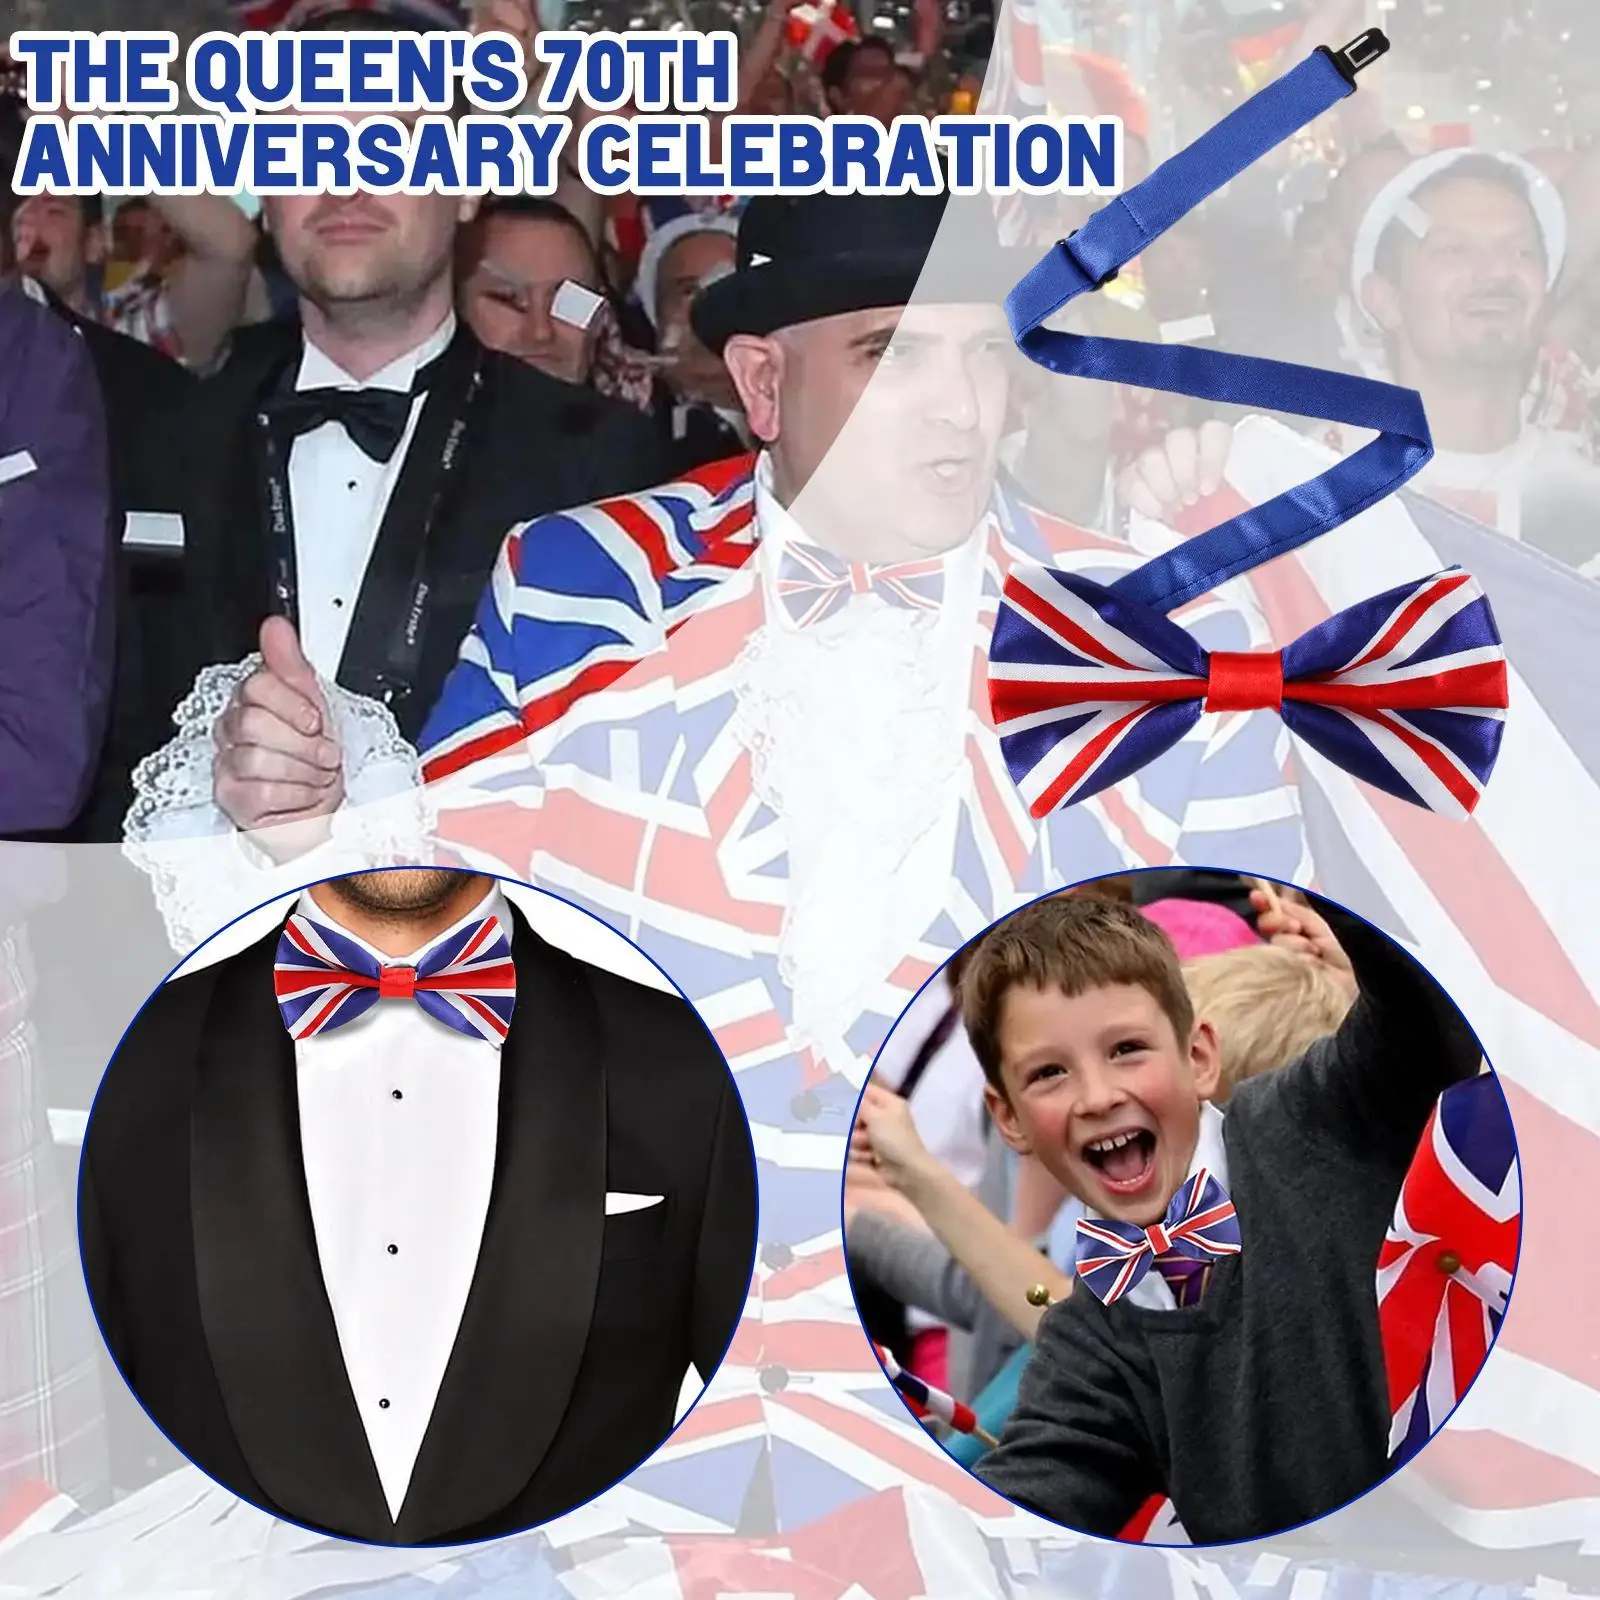 

Jubilee Celebration Bow Tie Adjustable Union Jack Bow Tie Britain Bow Tie The Queen's 70th Anniversary Celebration Party Supply